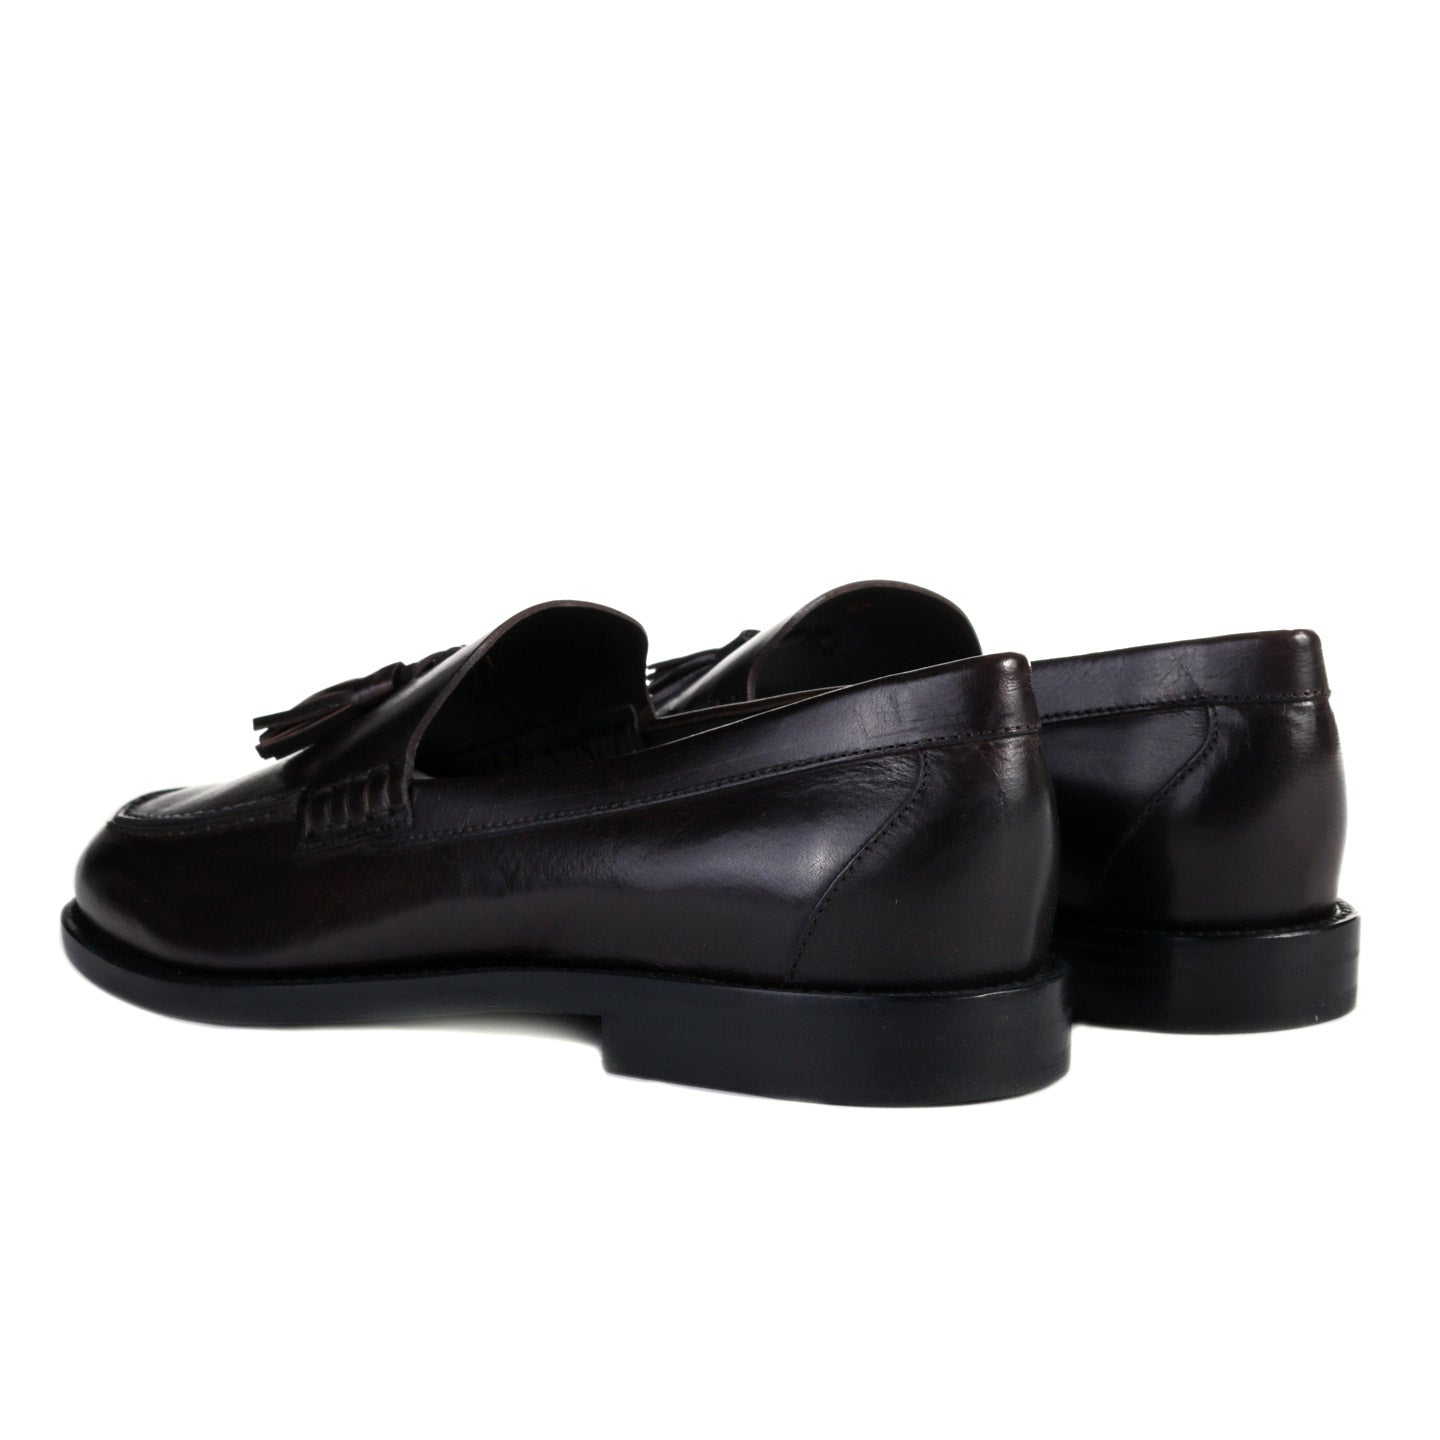 A KIND OF GUISE NAPOLI LOAFER DARK CHOCOLATE